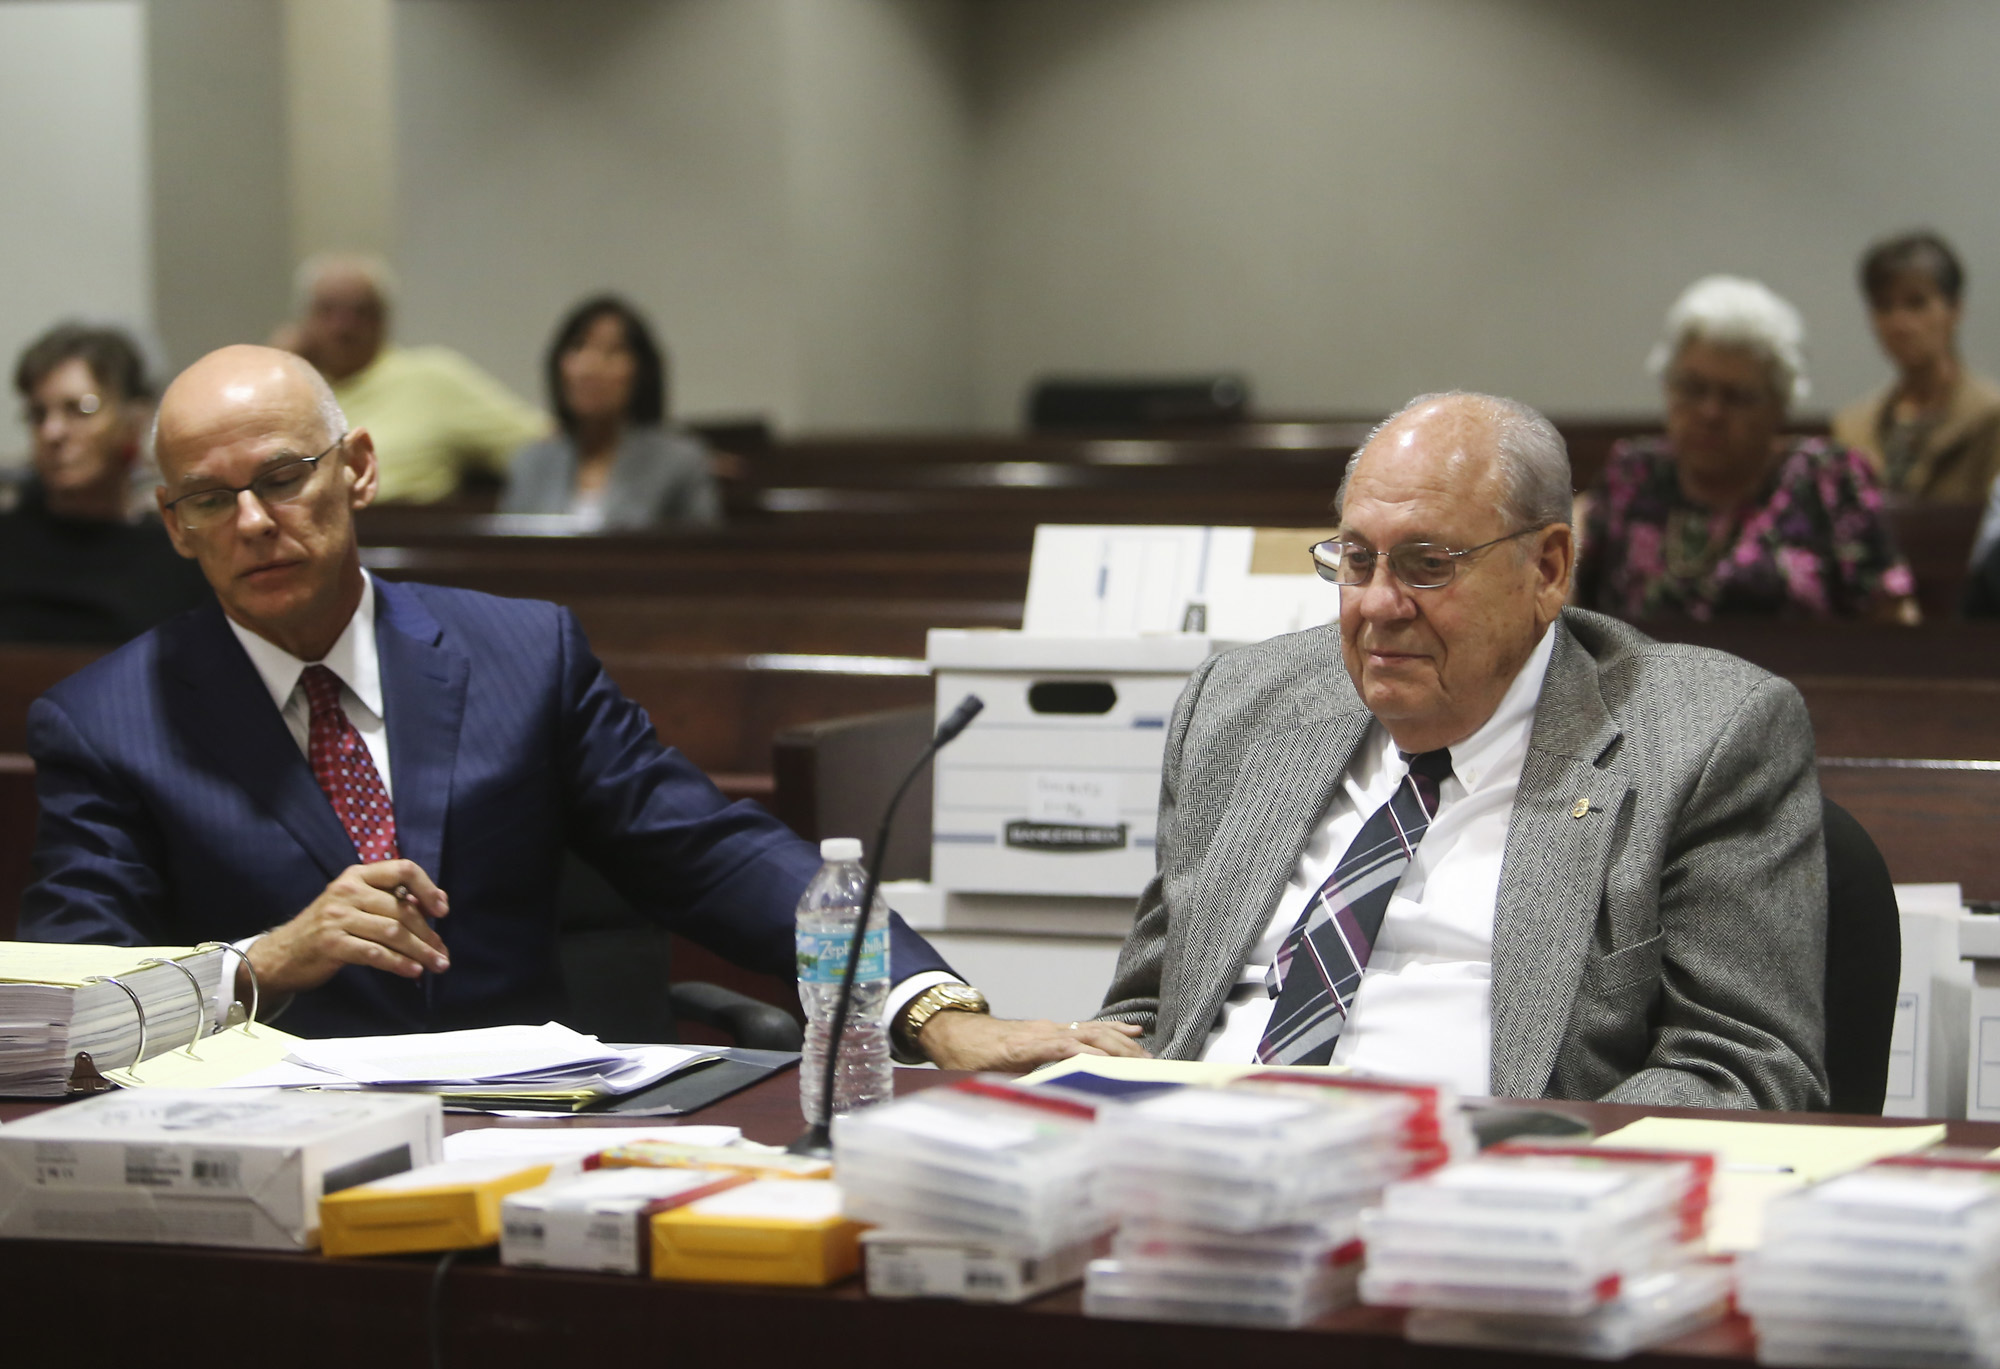 PHOTO: Retired police officer Curtis Reeves, right, sits with his defense attorney Richard Escobar during a hearing at the Robert D. Sumner Judicial Center, Feb. 21, 2017, in Dade City, Florida. 